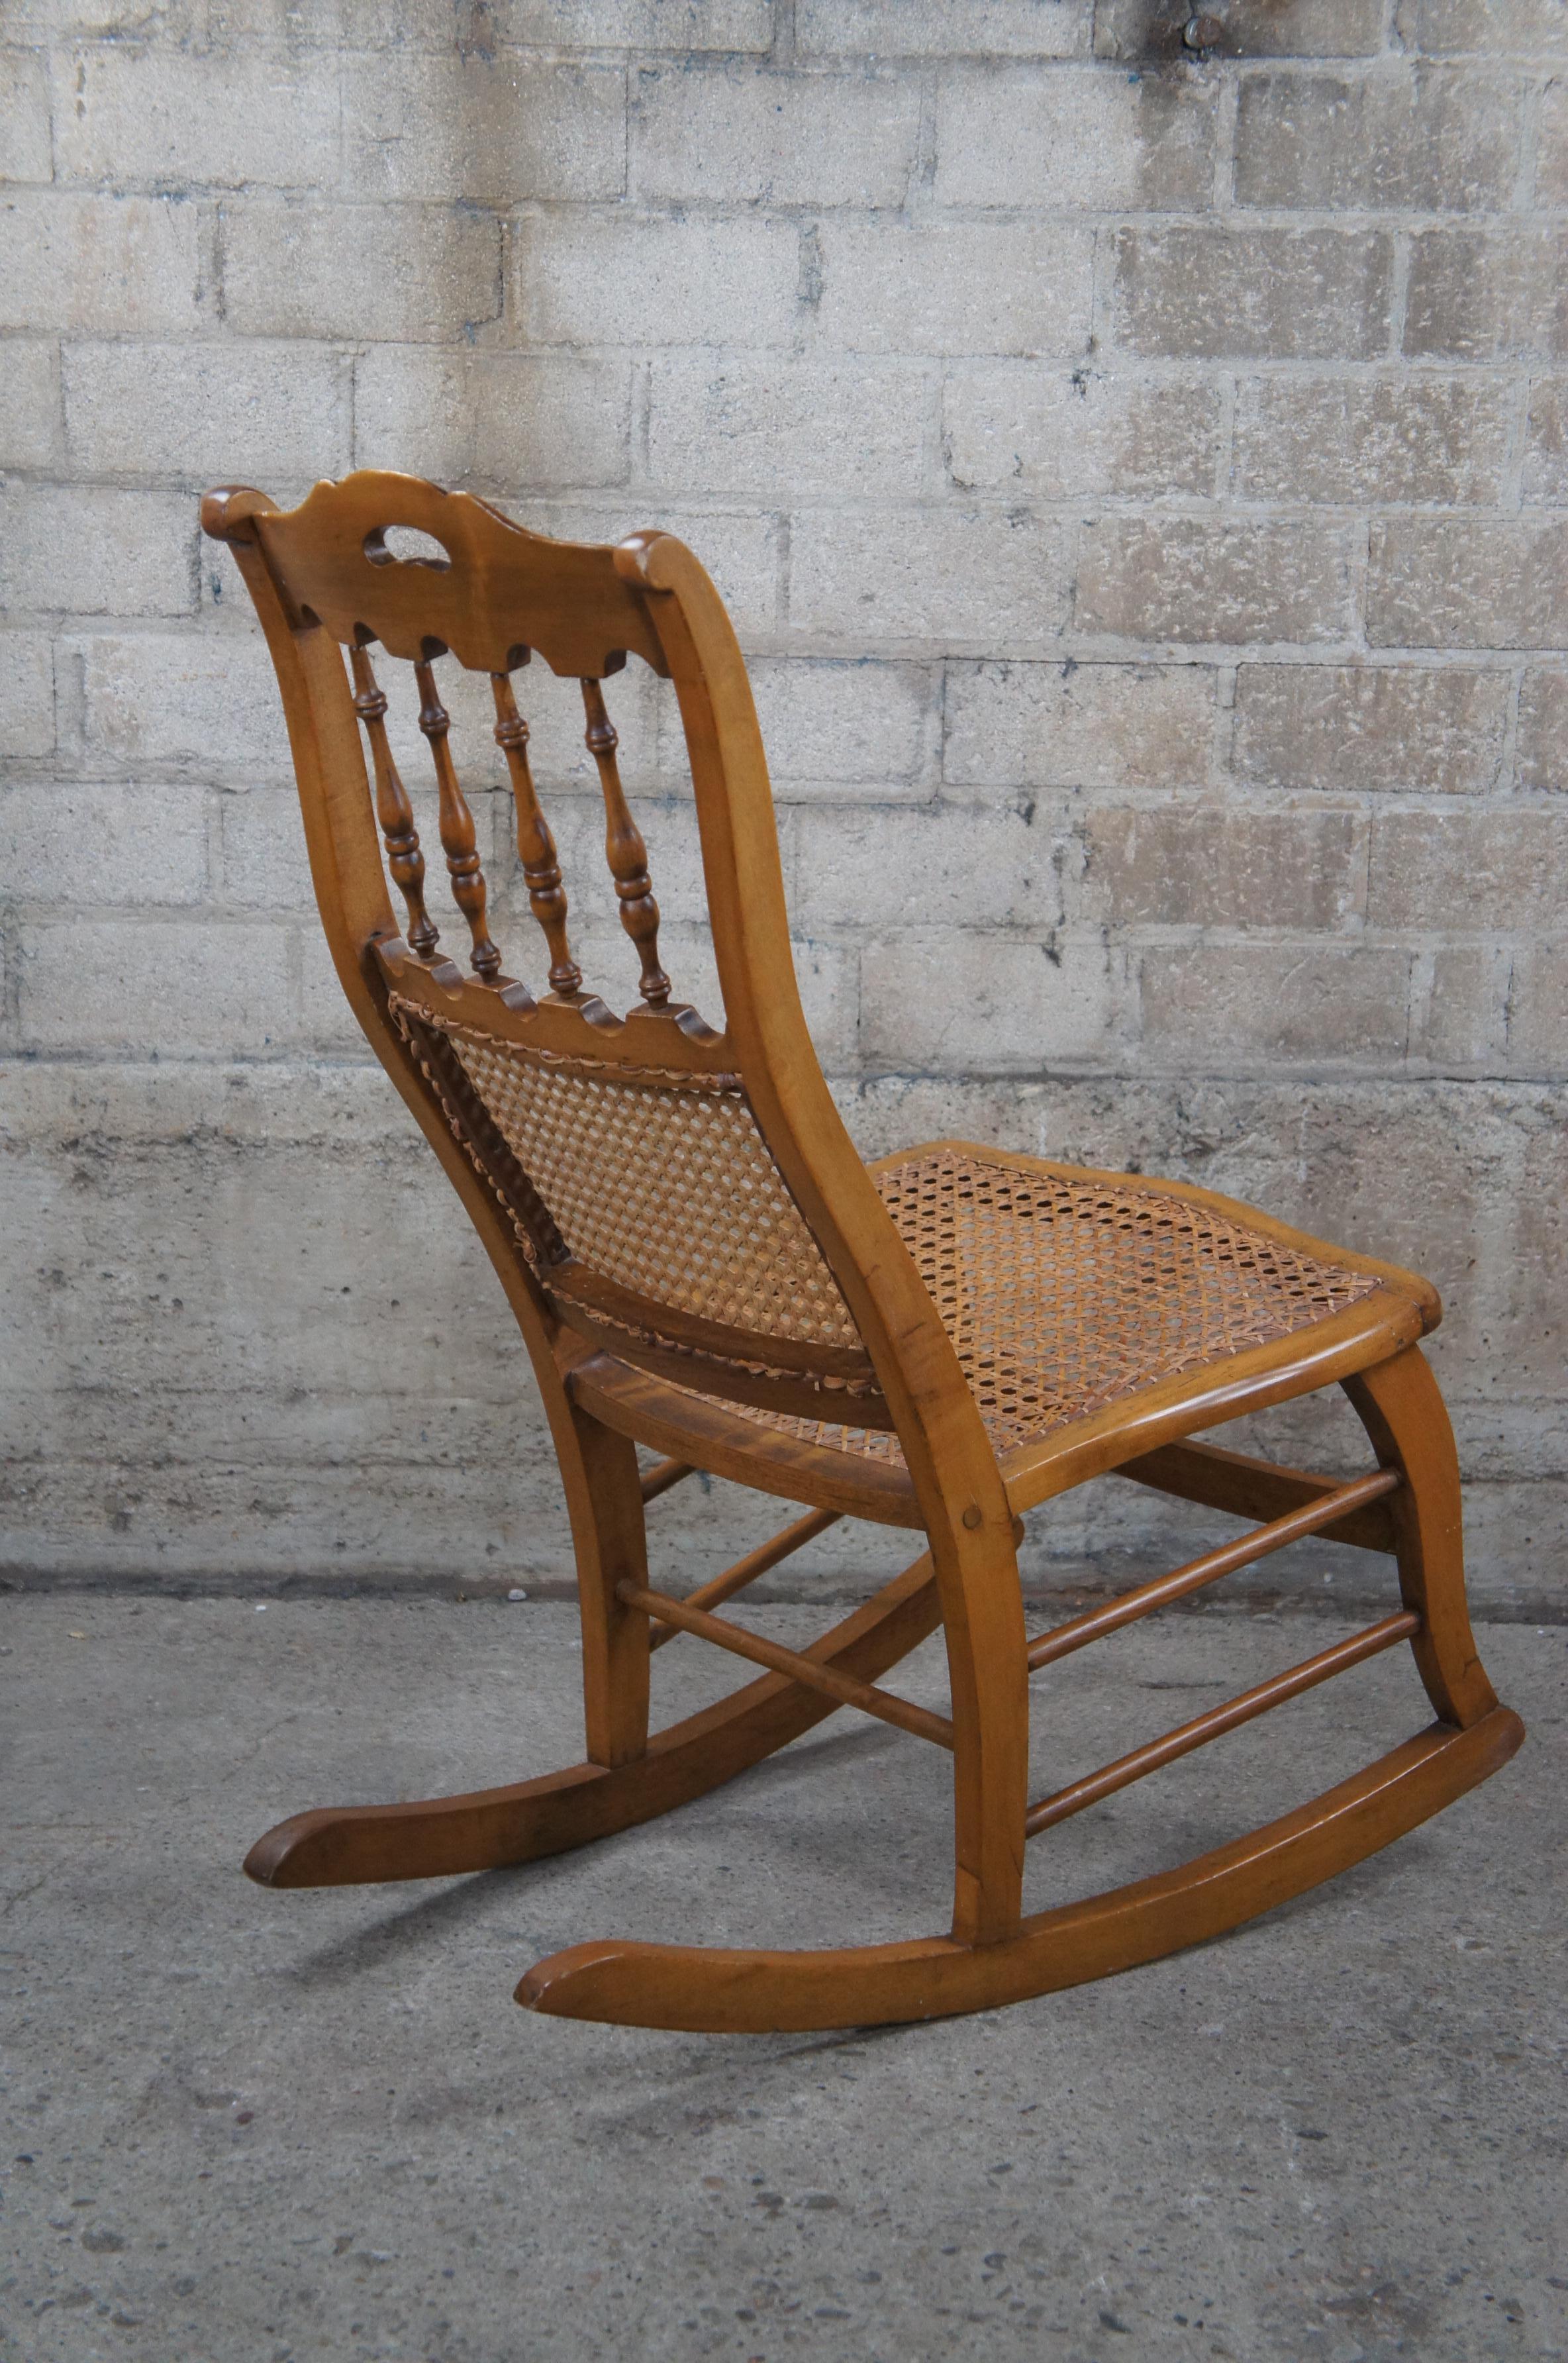 Antique Early American Maple Spindle Back Rocking Chair Cane Seat Petite Rocker In Good Condition For Sale In Dayton, OH